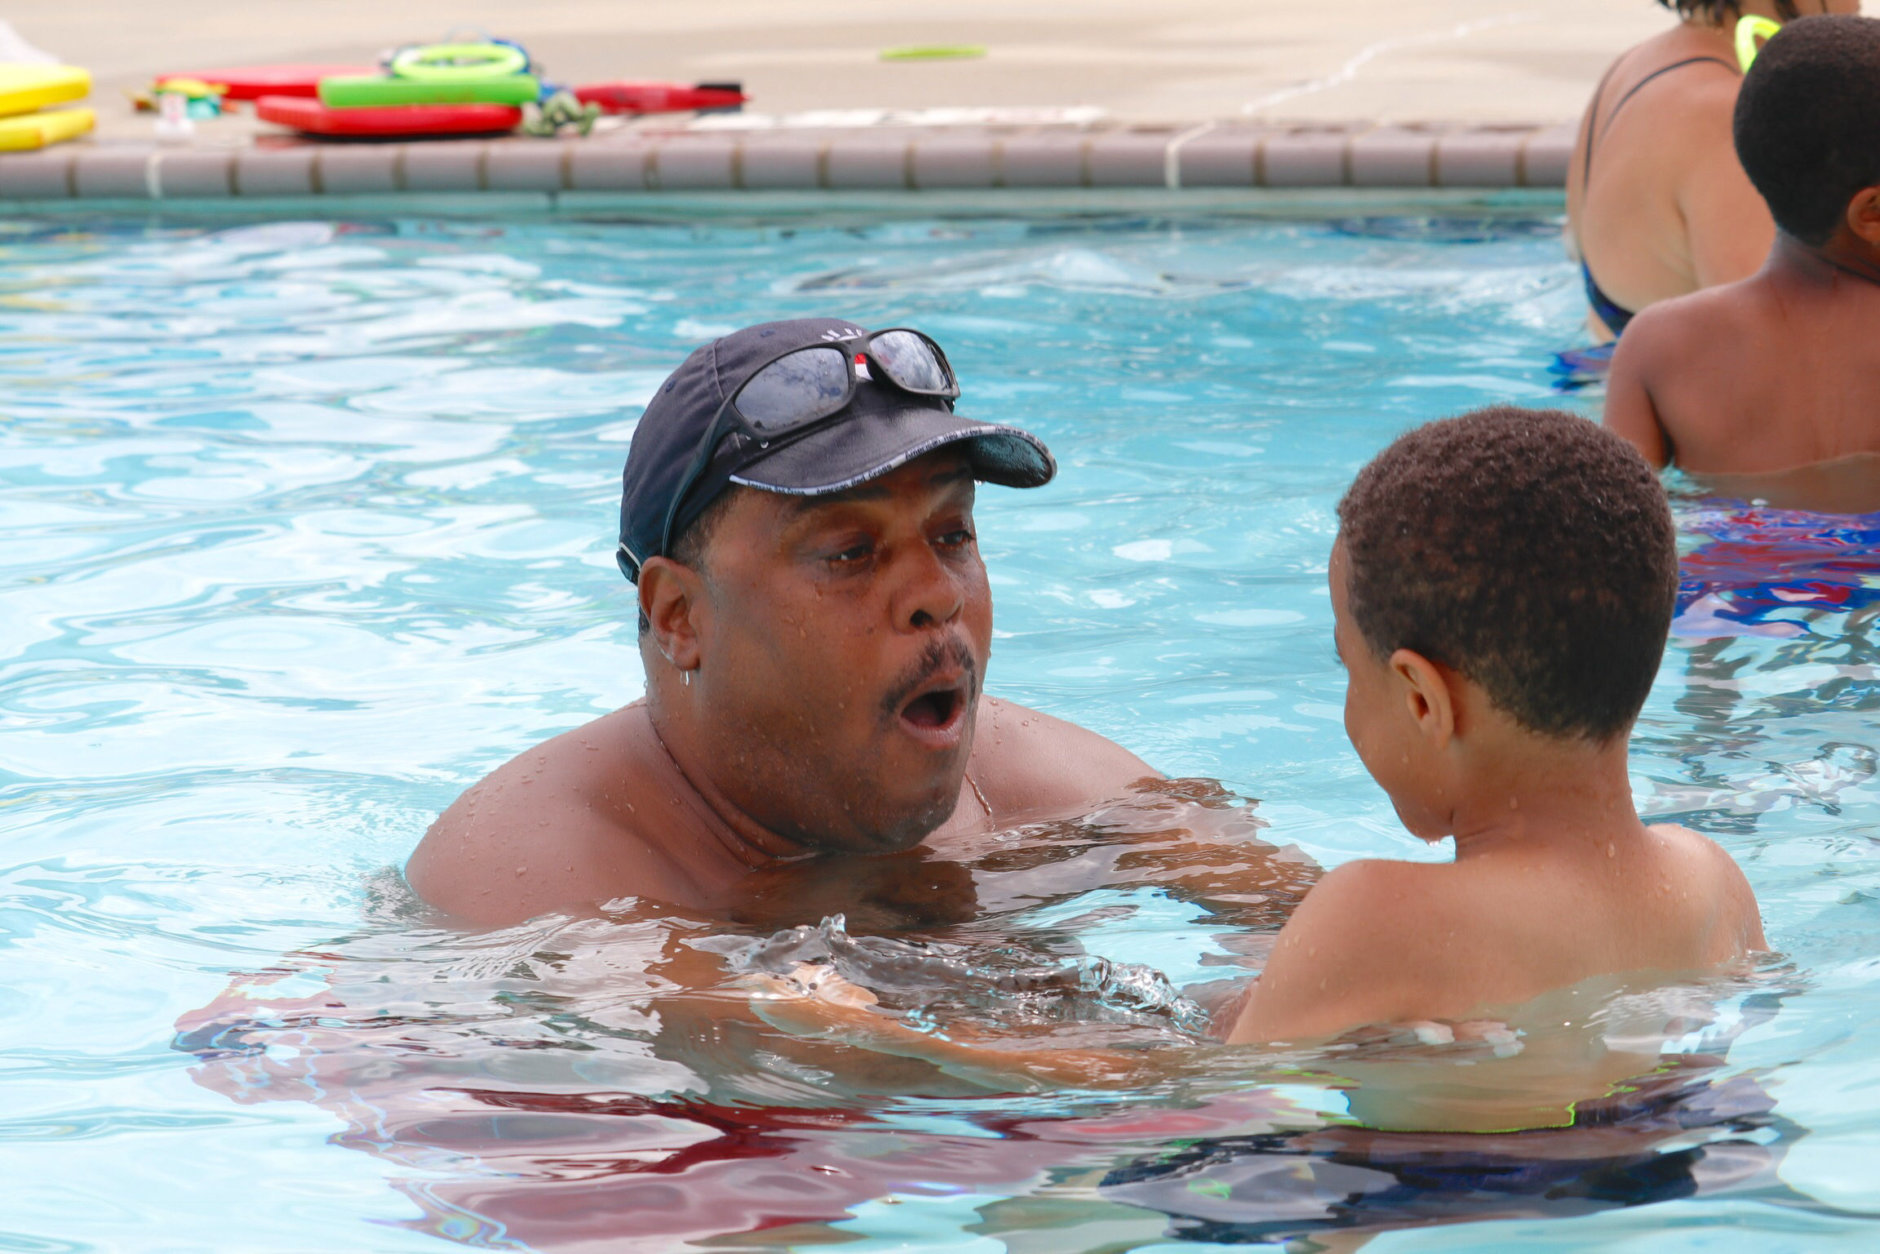 Aquatics instructor Bobby Broome was already in the water, and he called out to the kids, "Listen to me carefully. Are you listening?" (WTOP/Kate Ryan)